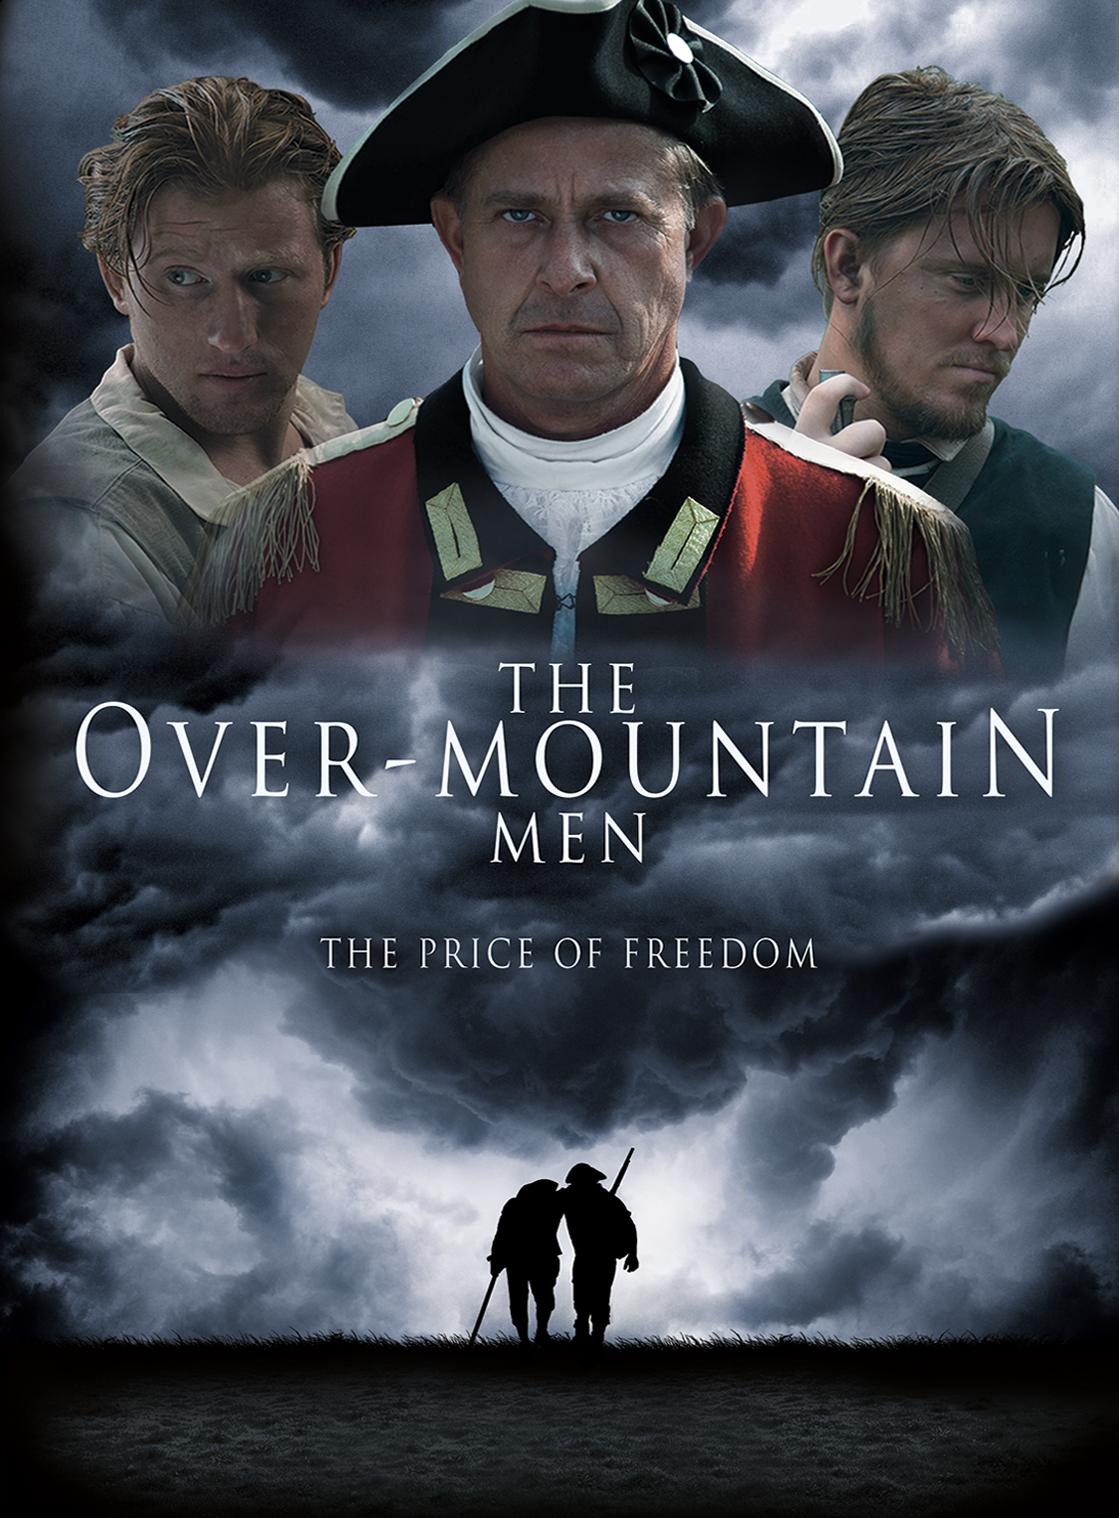 The Over-Mountain Men: The Price of Freedom